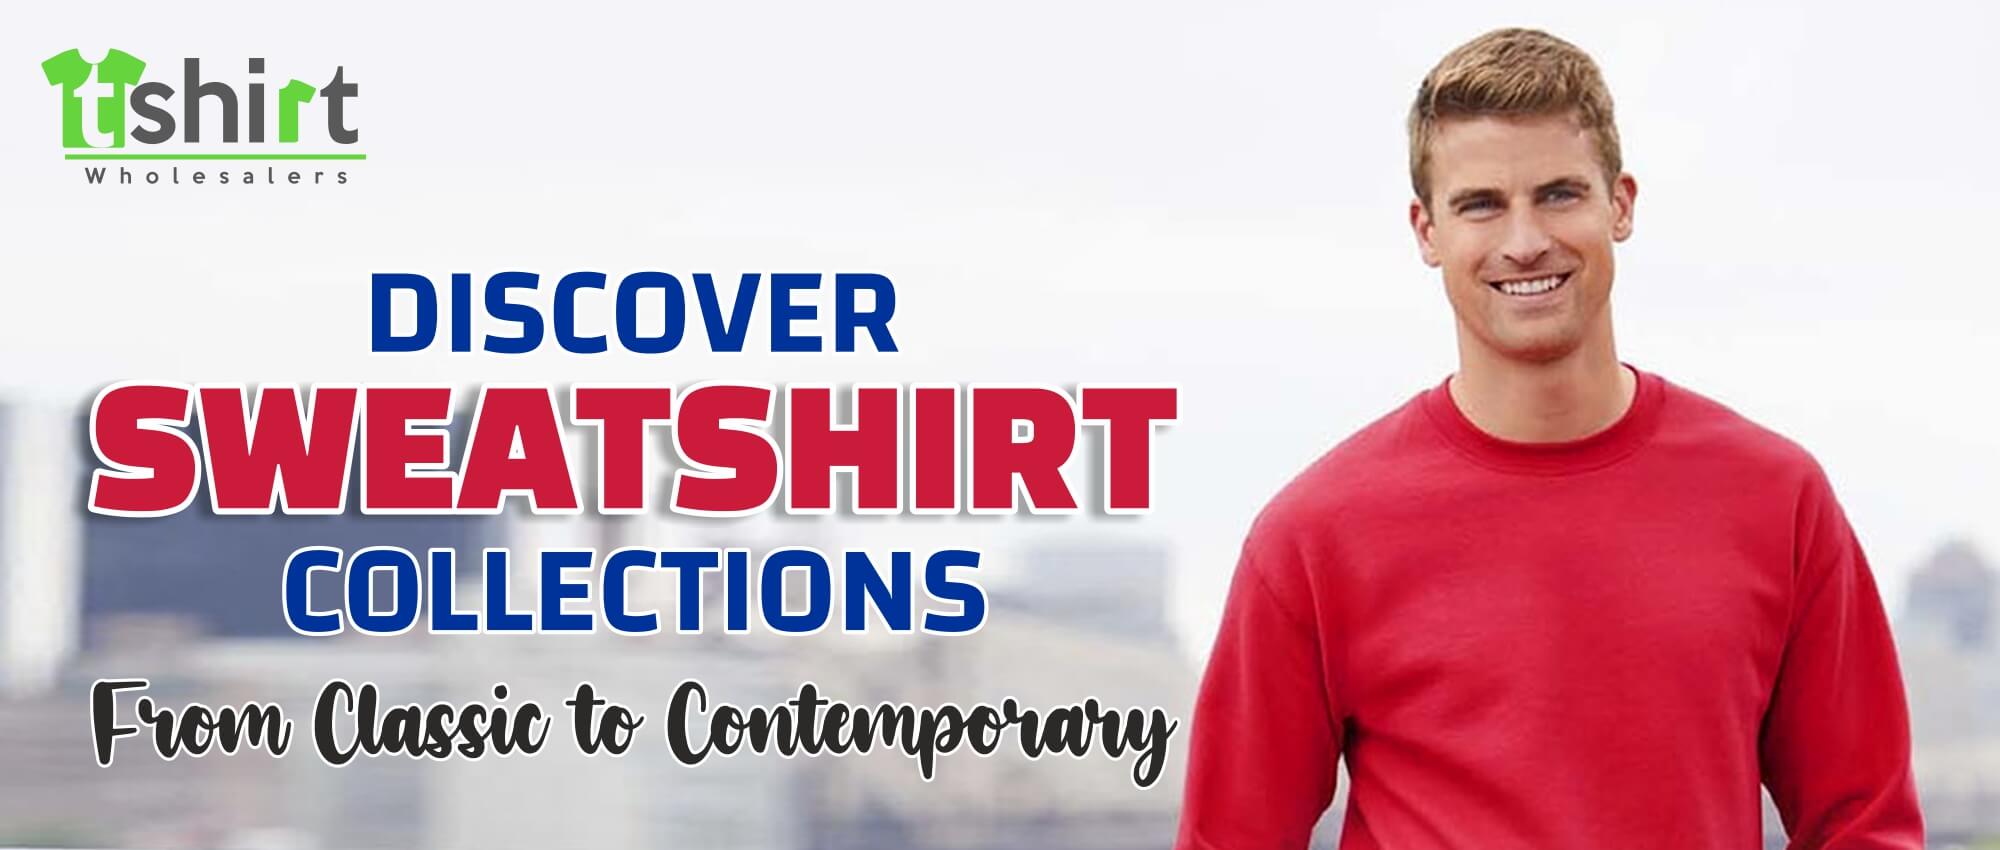 DISCOVER SWEATSHIRT COLLECTIONS - FROM CLASSIC TO CONTEMPORARY